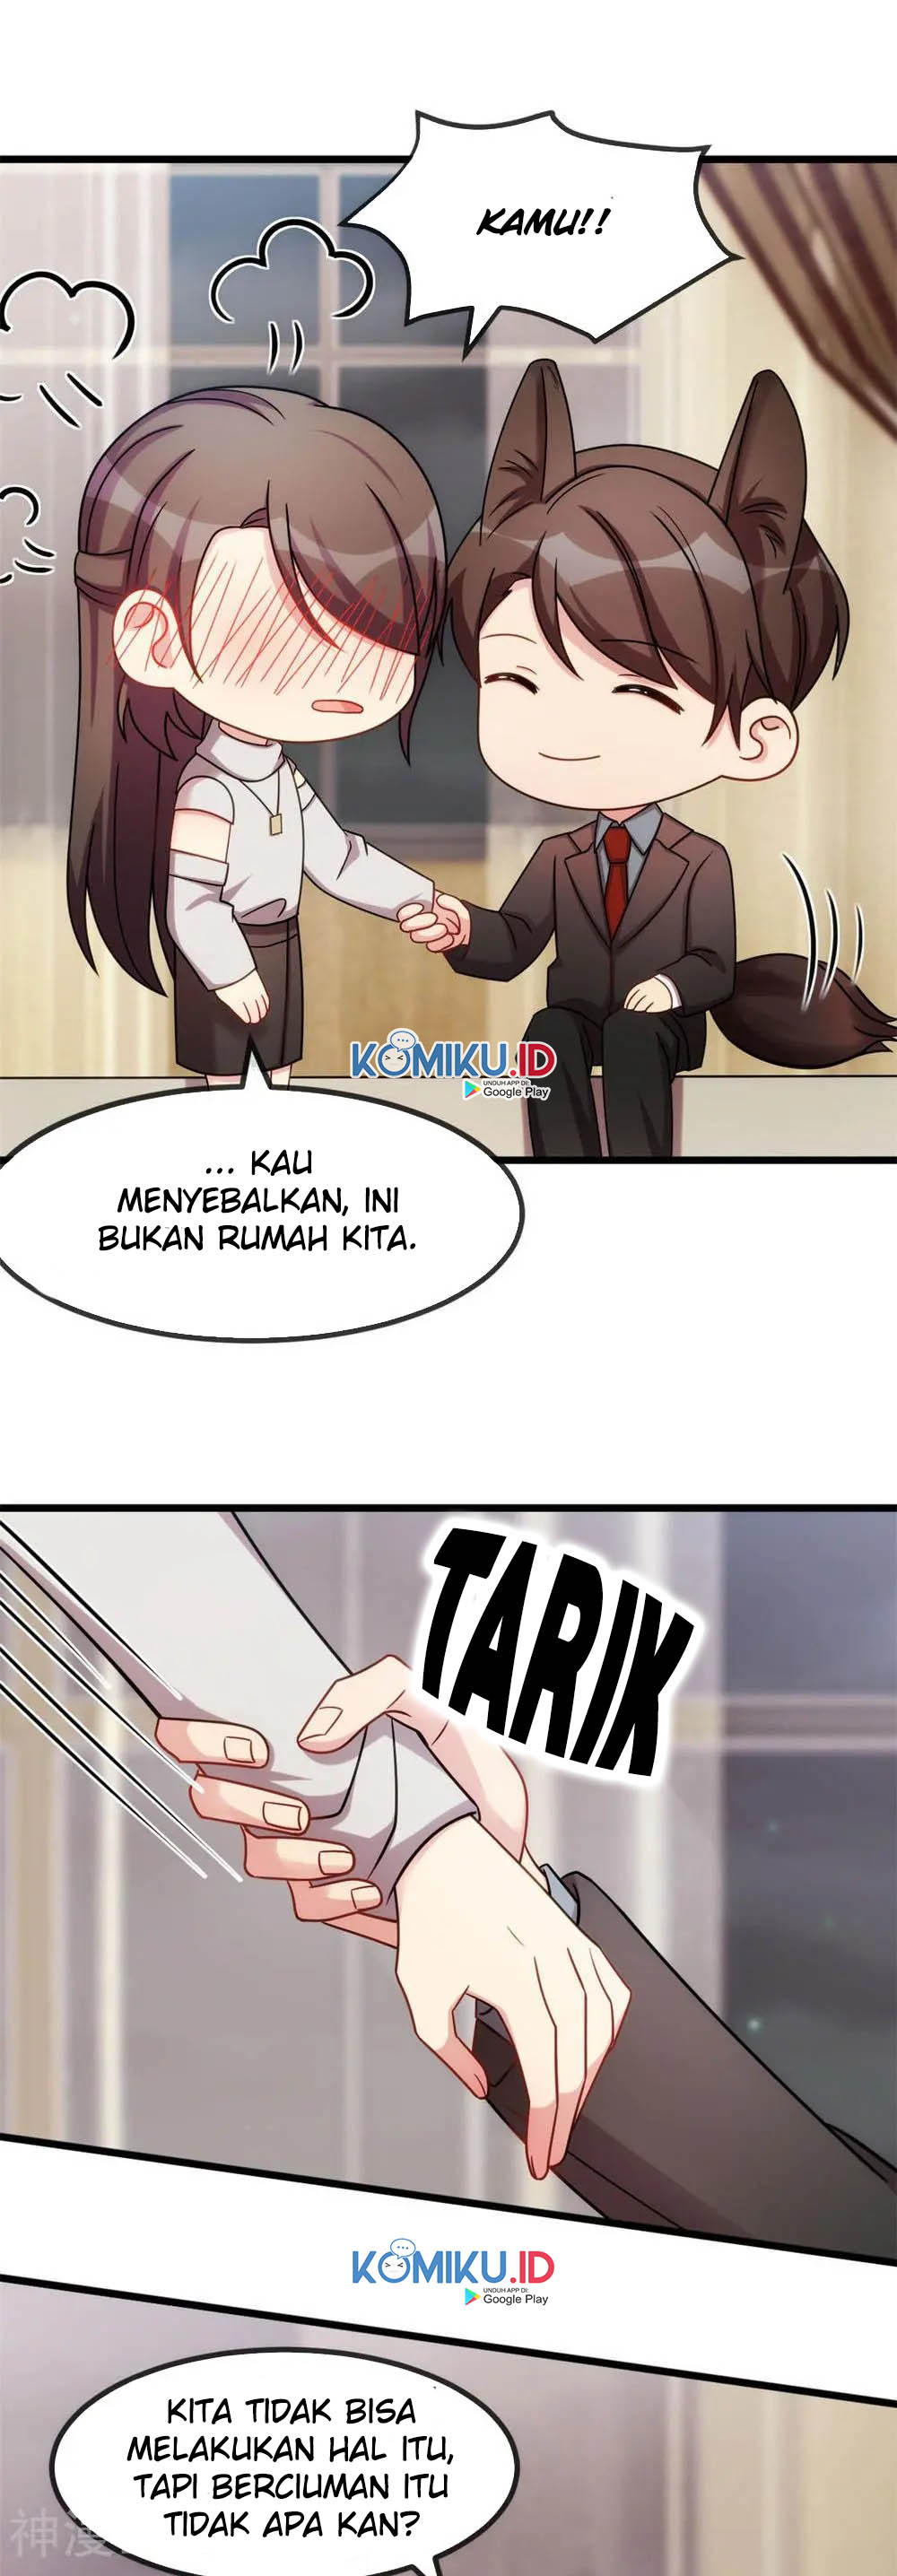 CEO’s Sudden Proposal Chapter 283 4